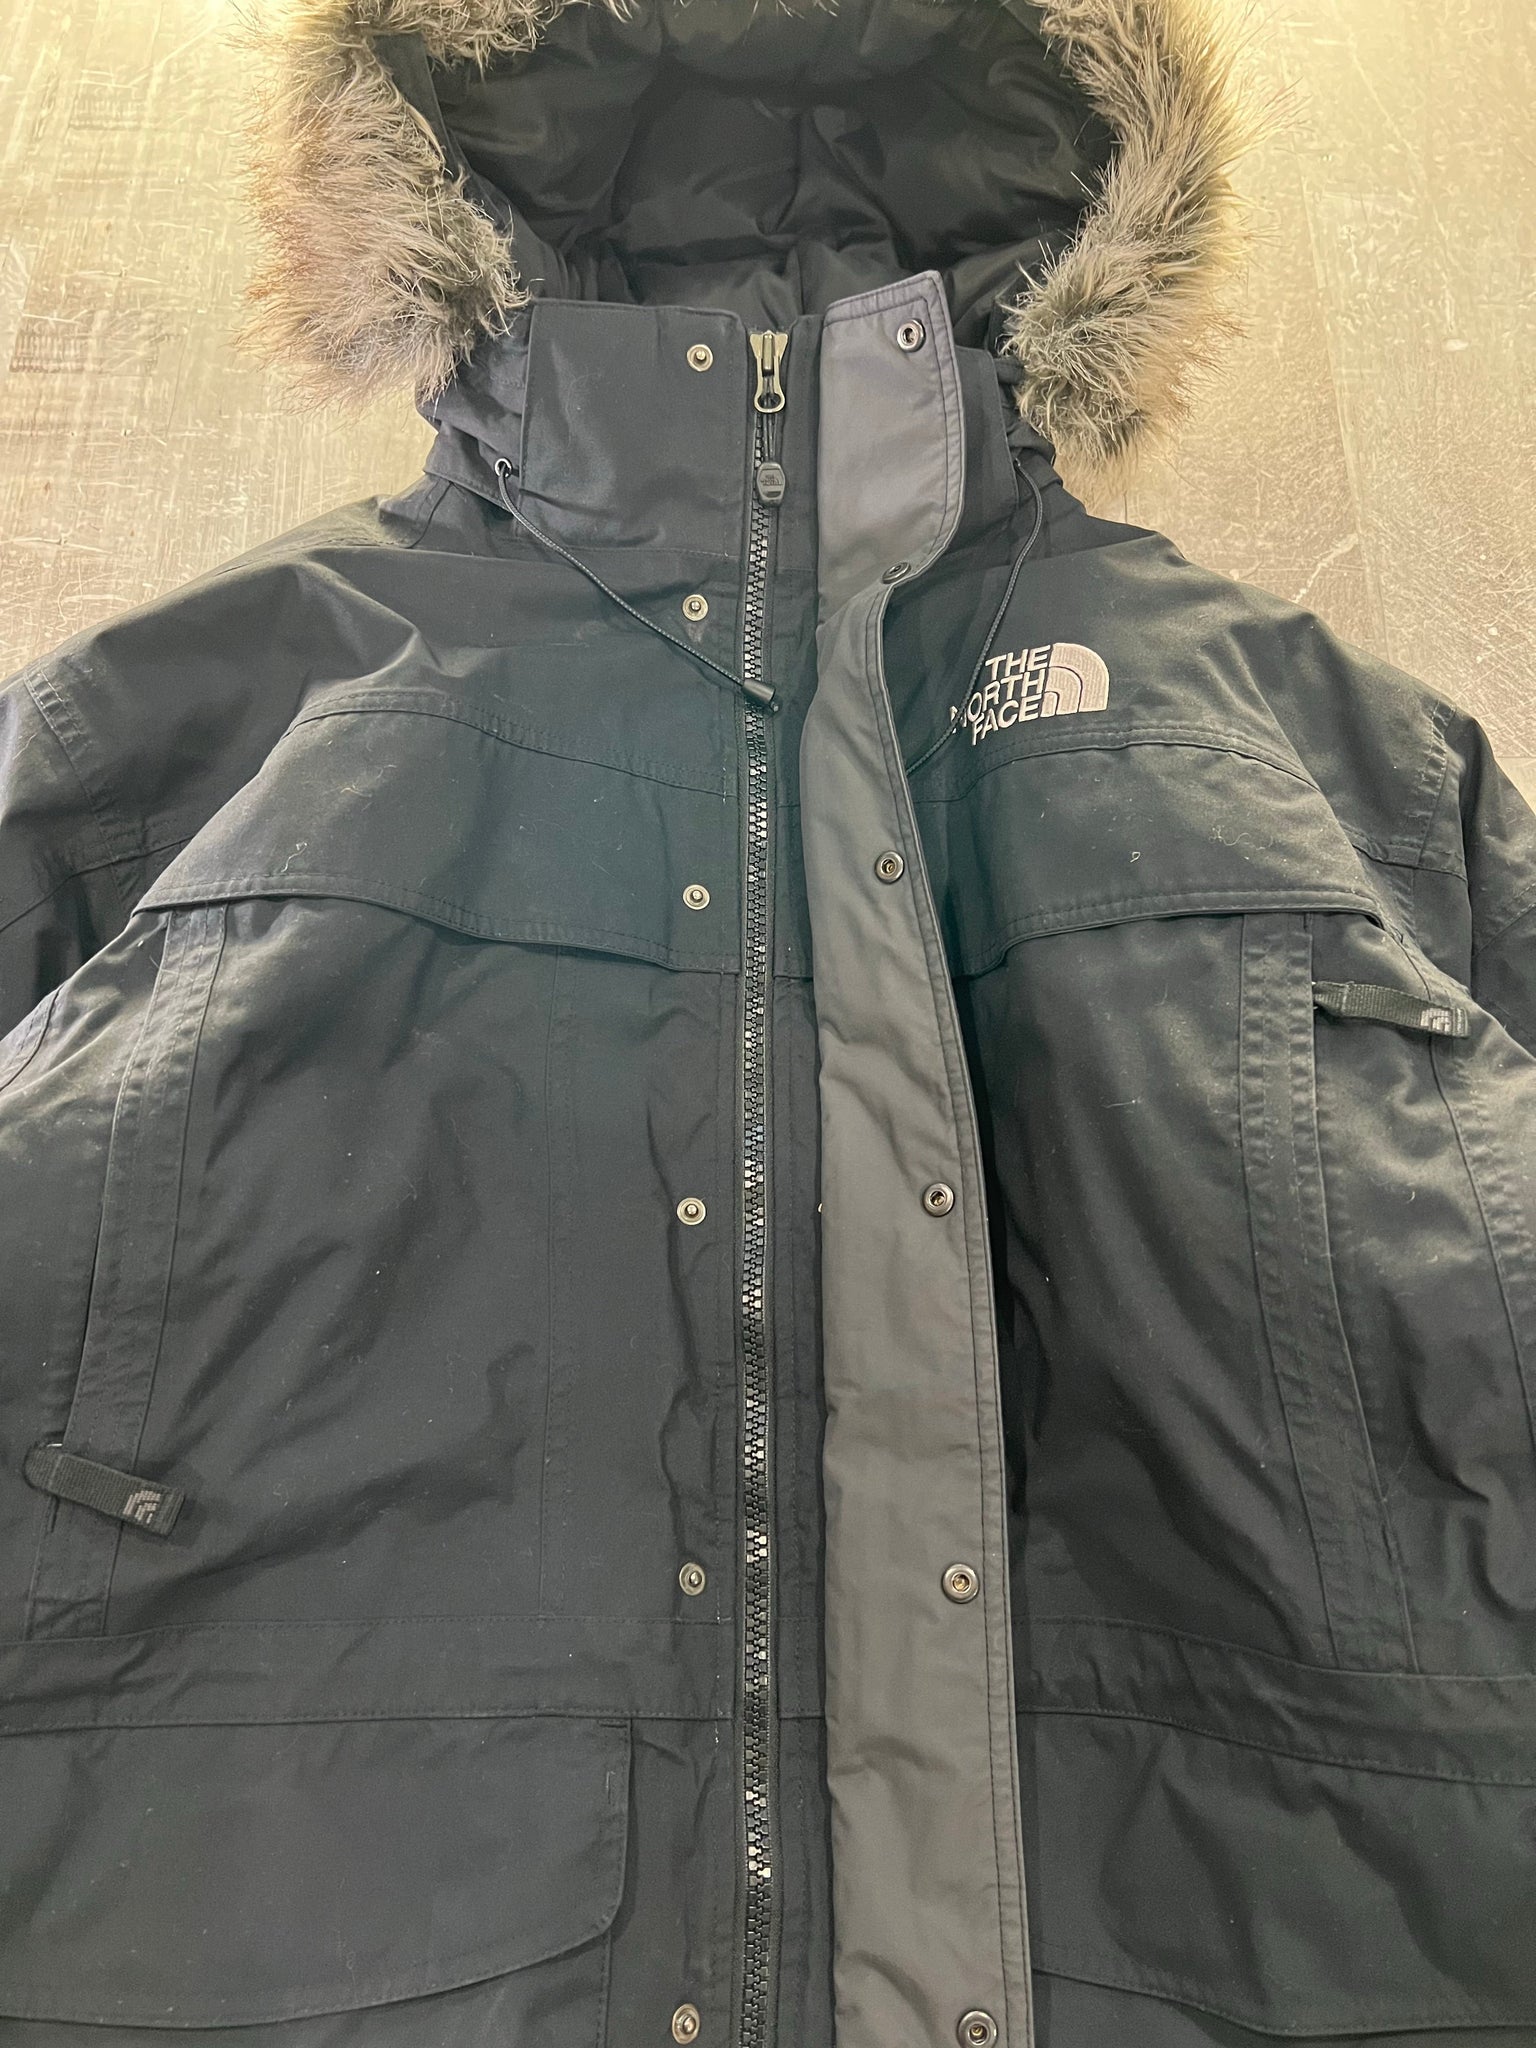 2010 North Face Hyvent down hooded jacket fits XL/XXL